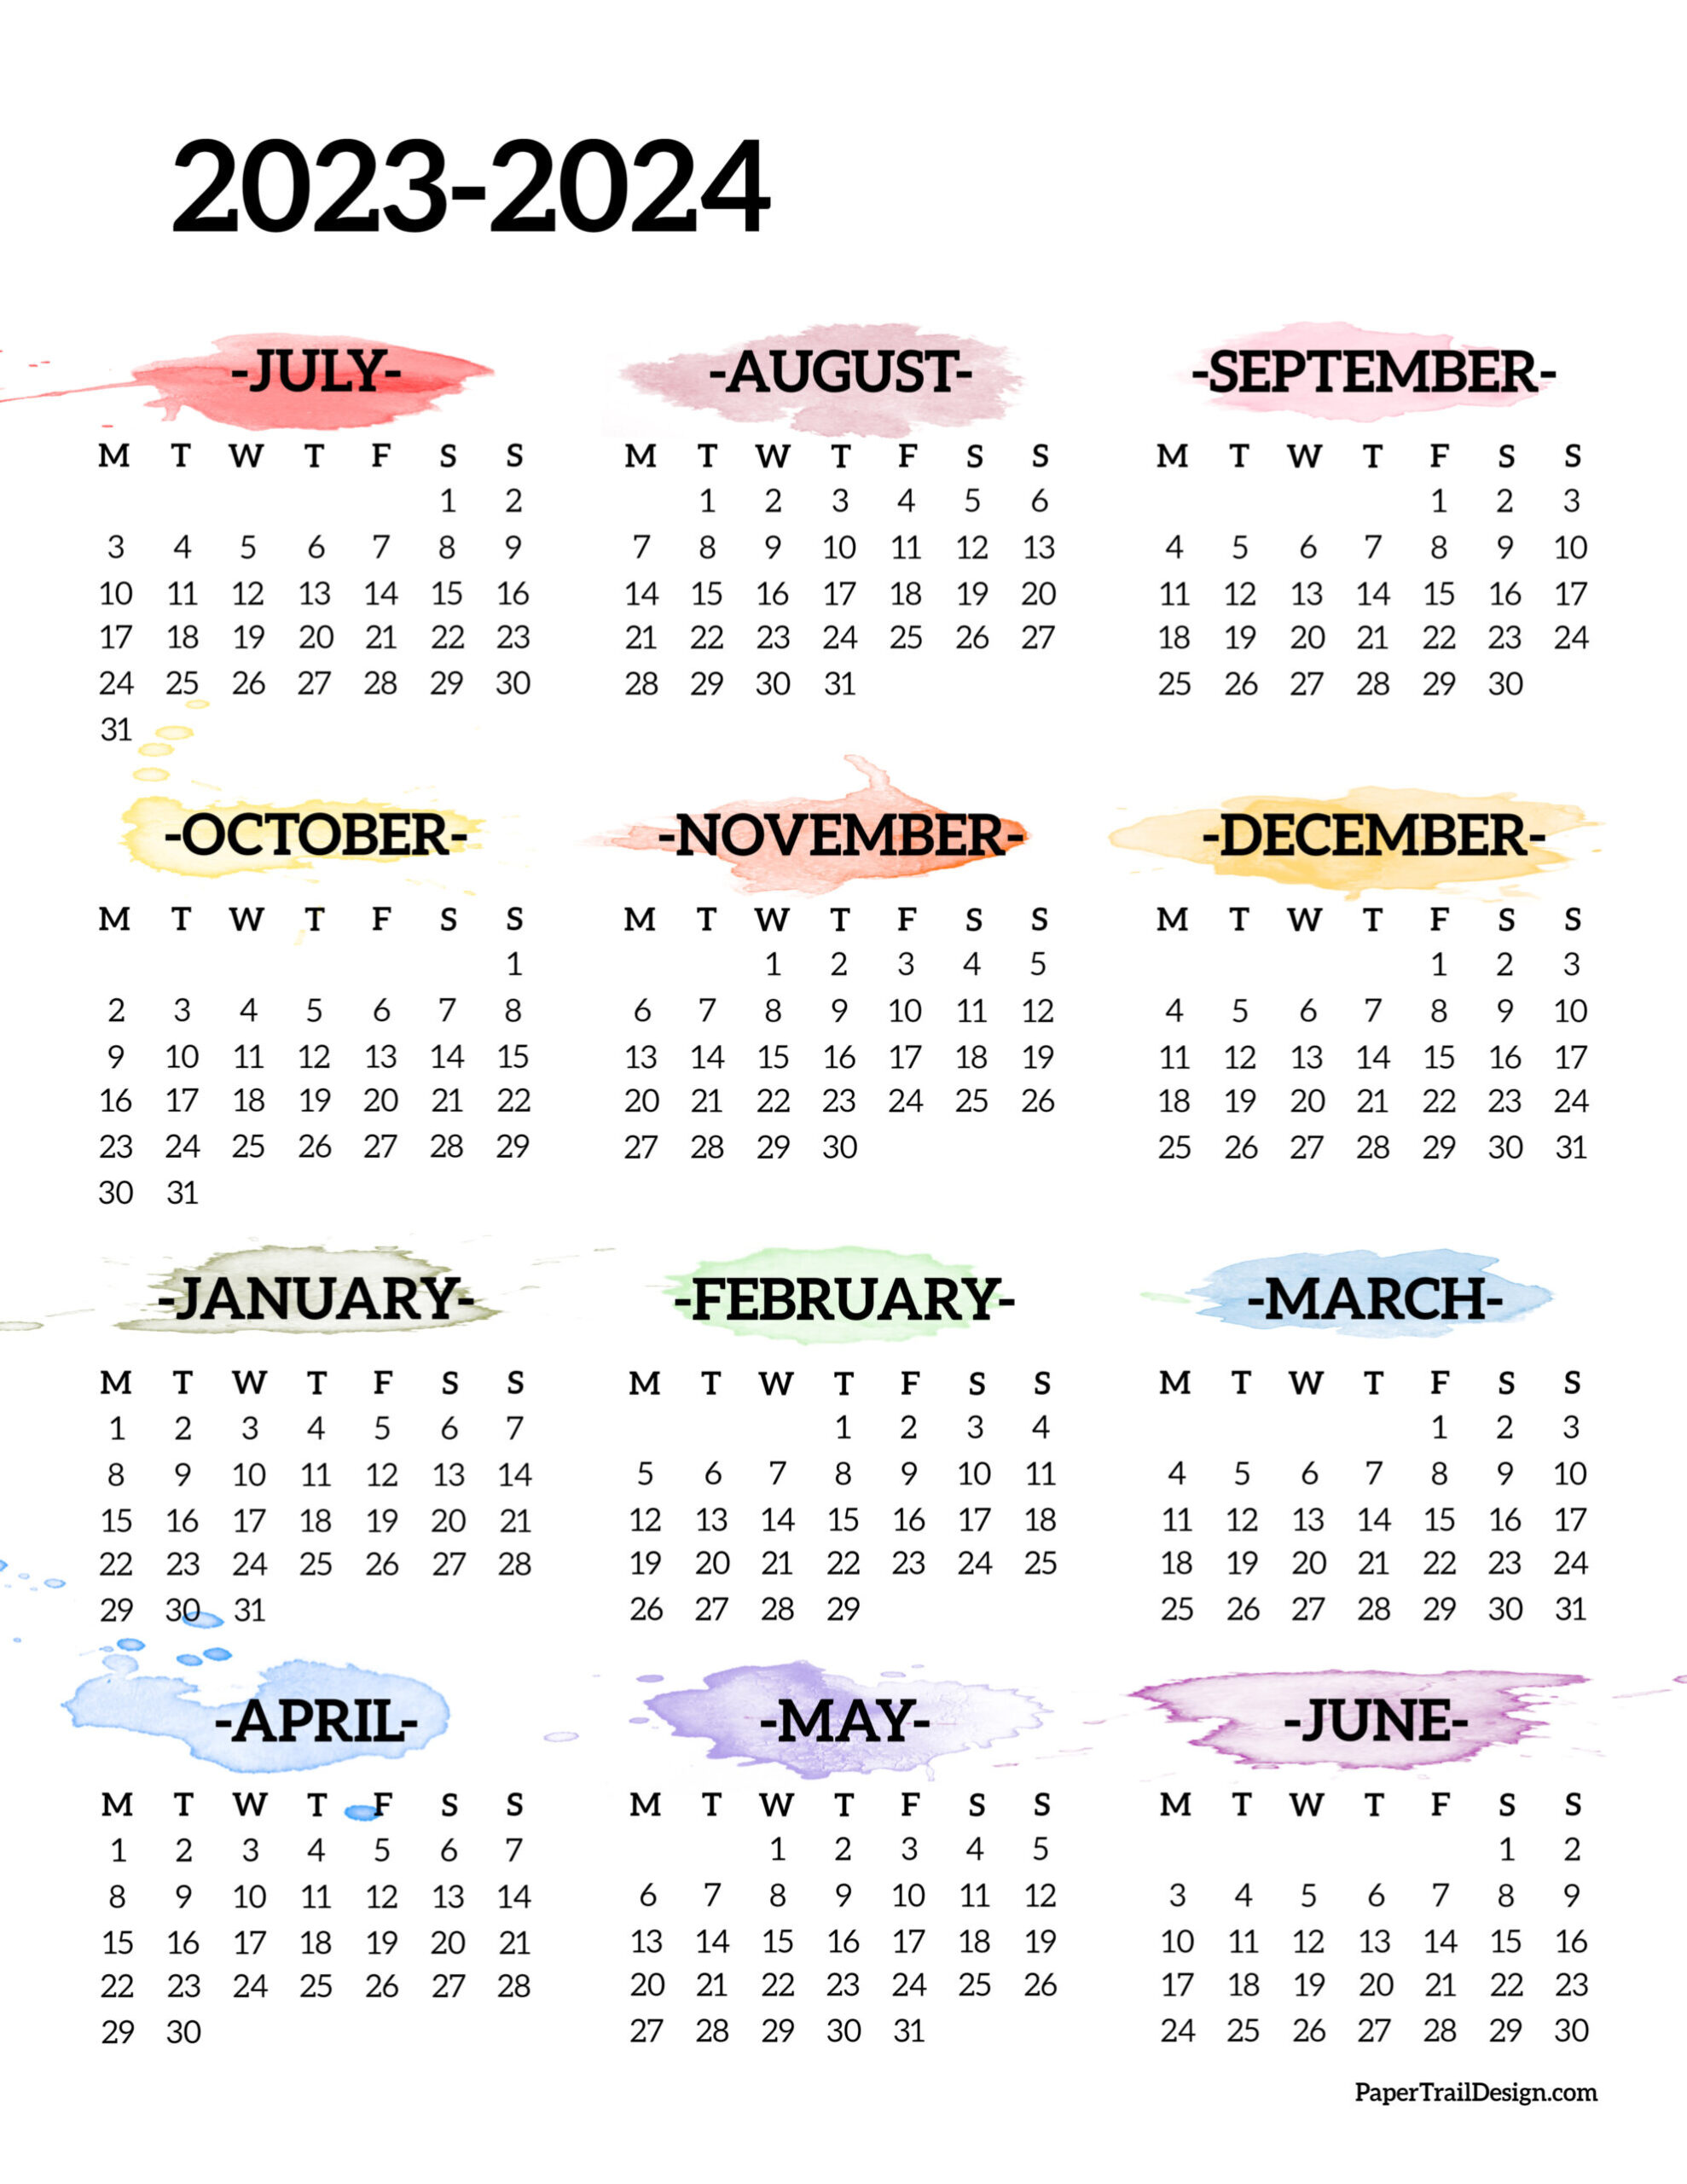 2023-2024 School Year Calendar Free Printable - Paper Trail Design with regard to July 2023 To March 2024 Calendar